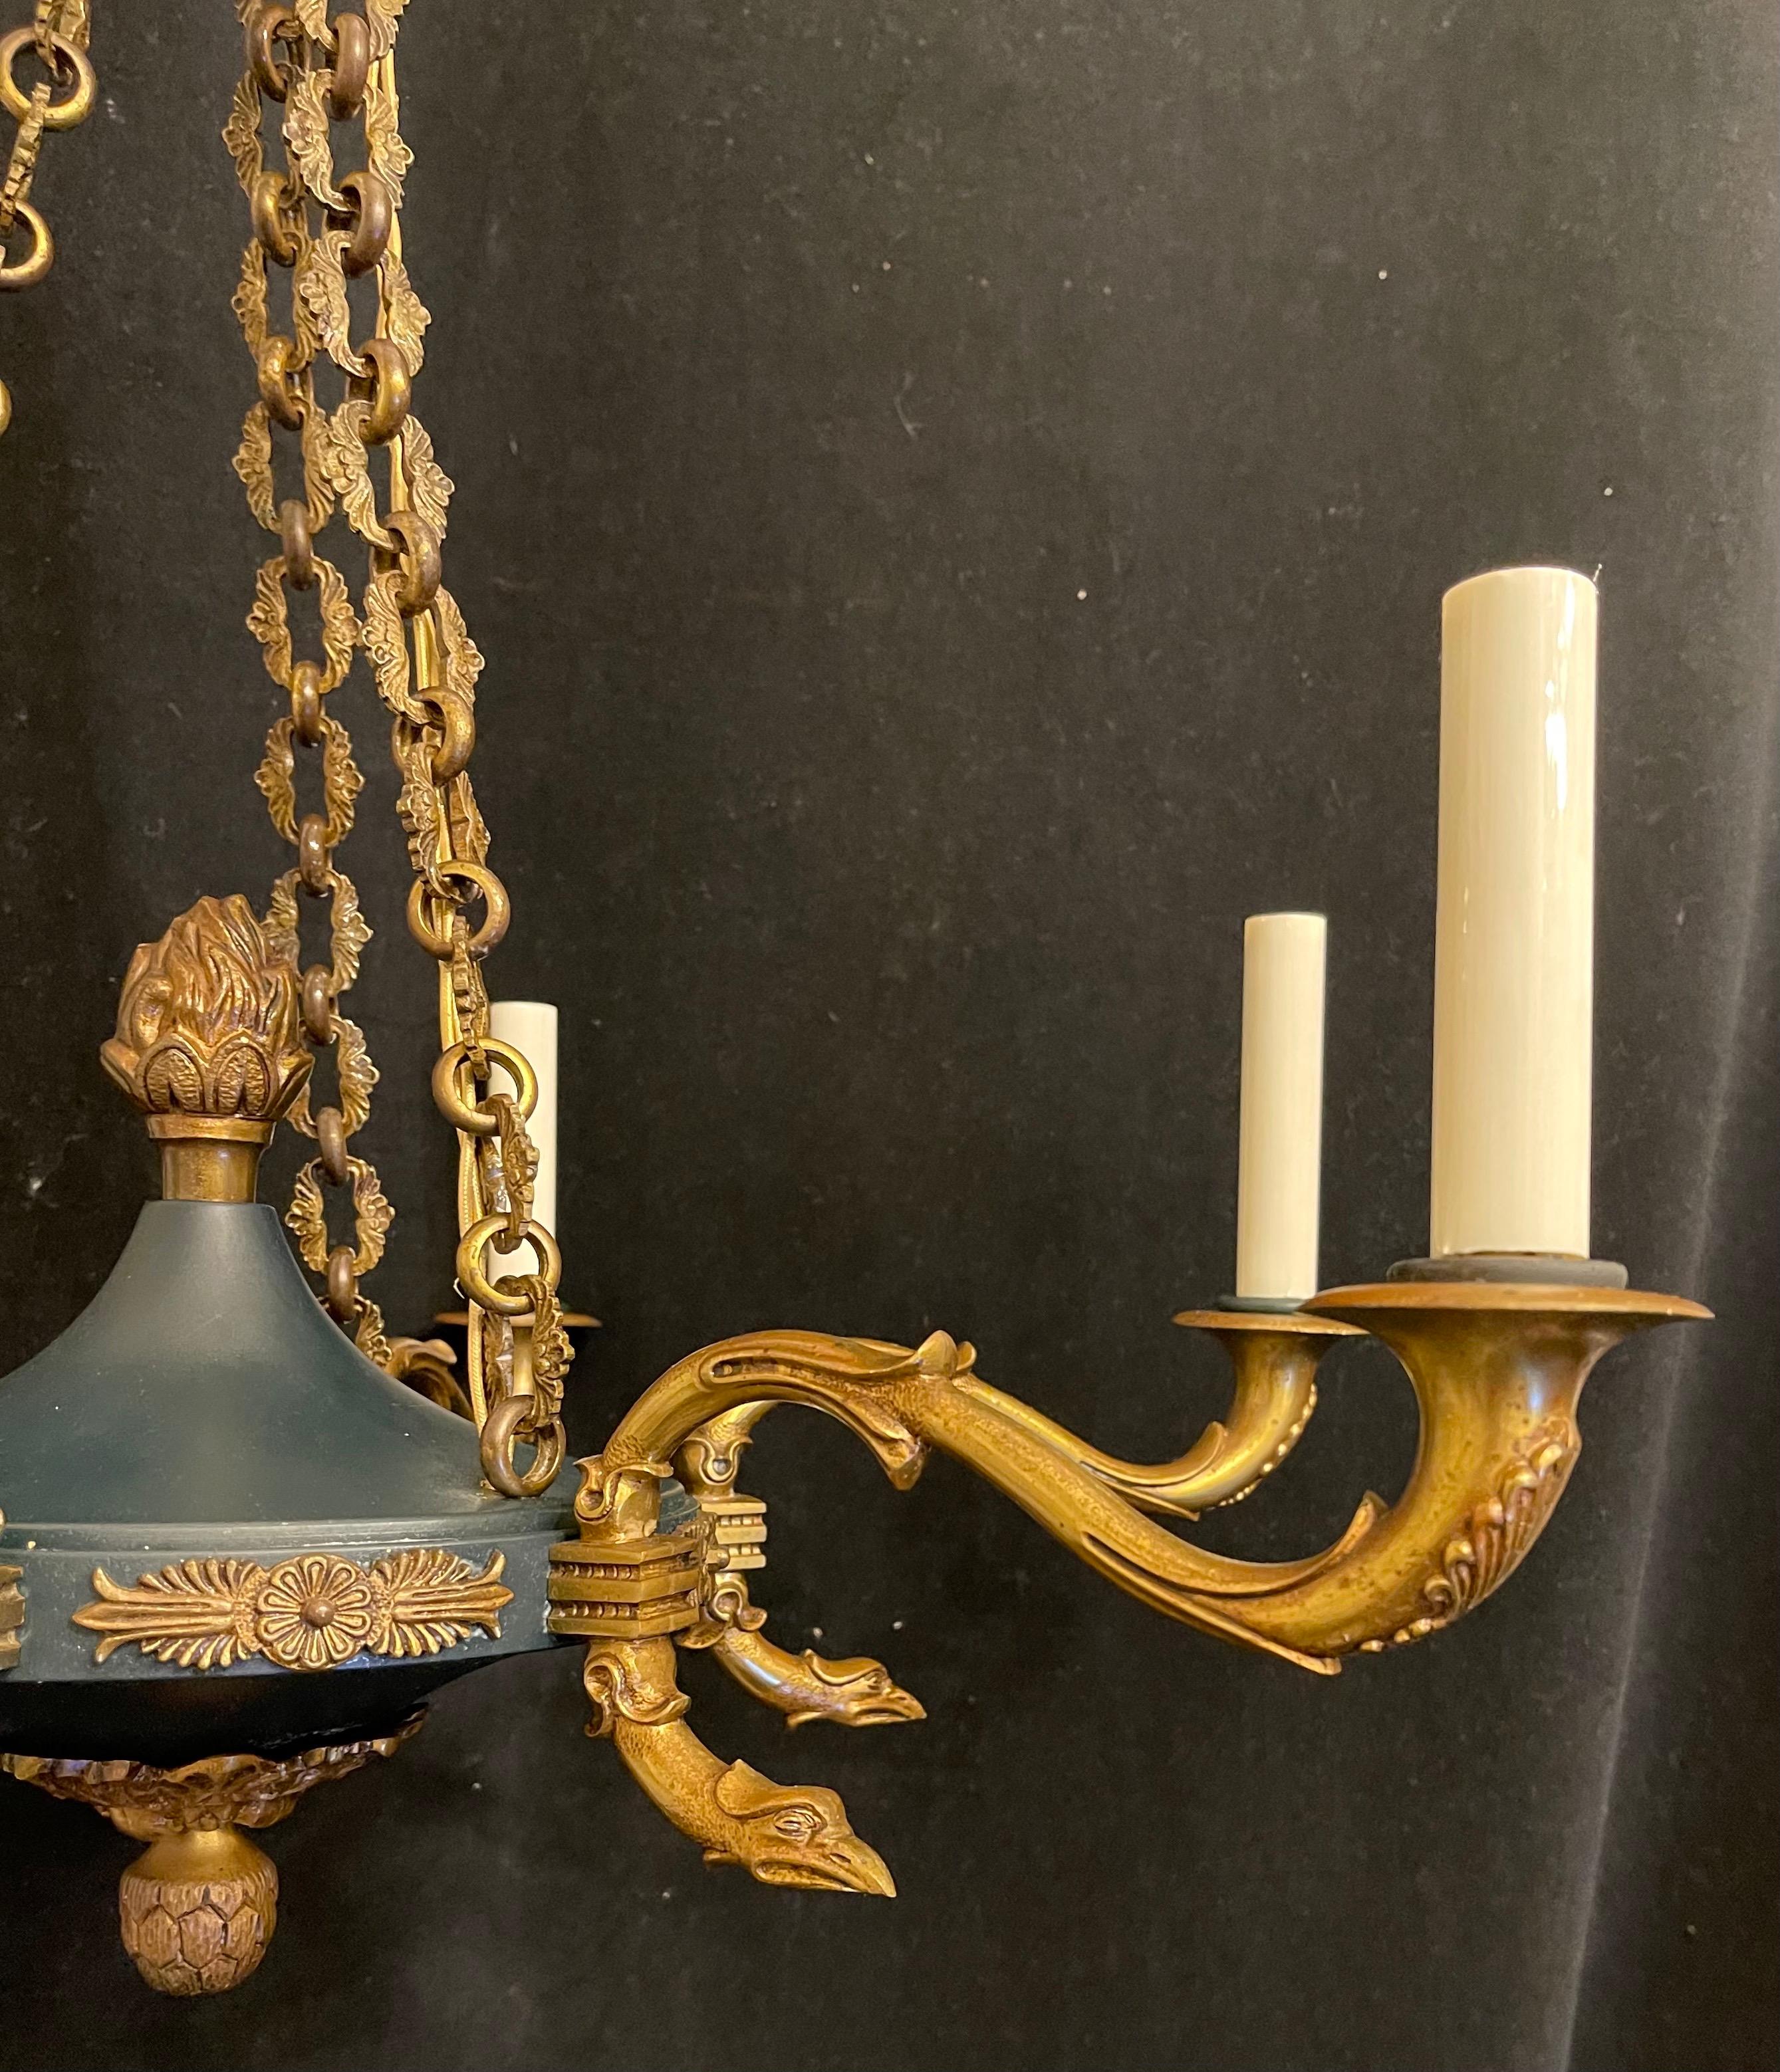 A wonderful French empire neoclassical patinated ormolu bronze 6-light chandelier fixture
completely rewired with new sockets, comes with chain canopy and mounting hardware.